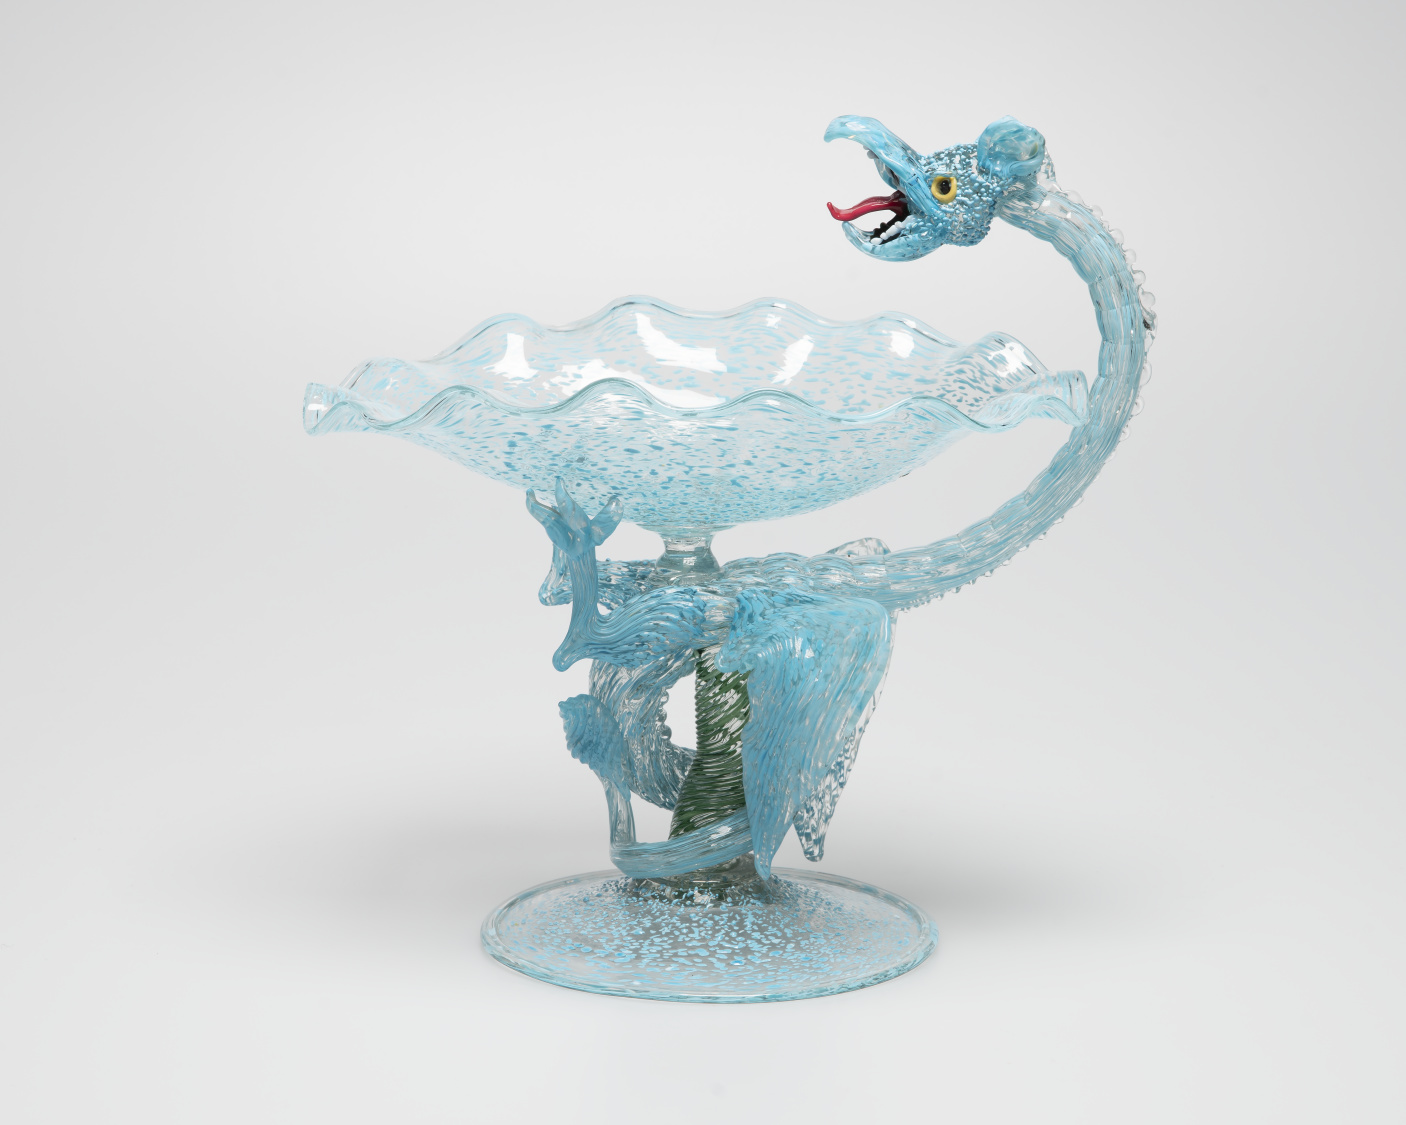 Intricate glass vessel. A speckled dragon, spirals up the stem creating a handle.